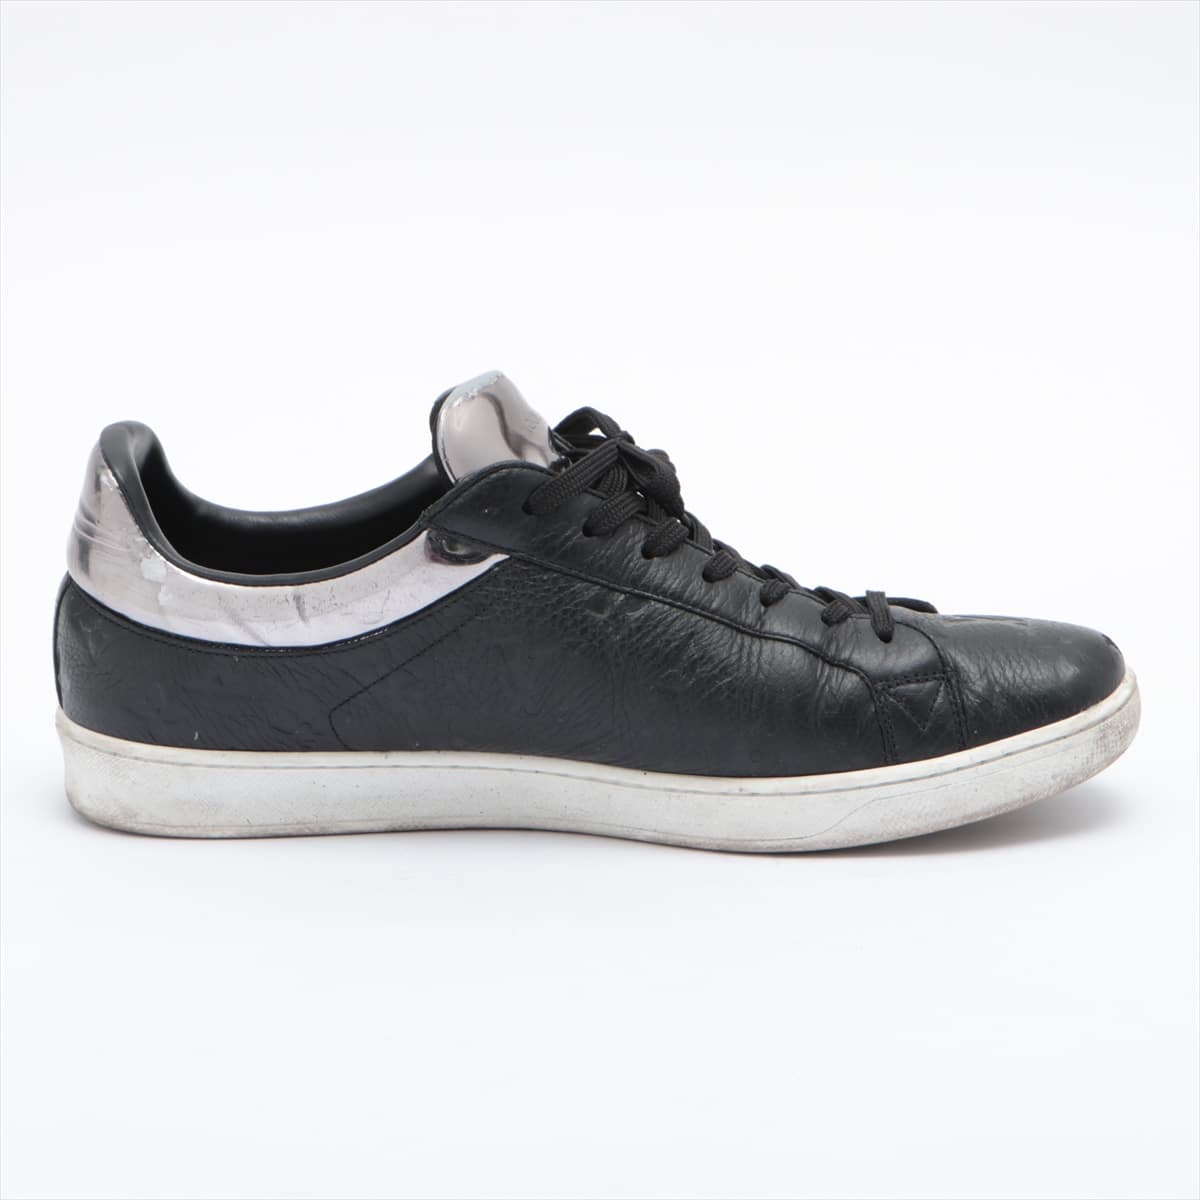 Louis Vuitton Luxembourg Line MS0230 Leather Sneakers 9 Men's Black